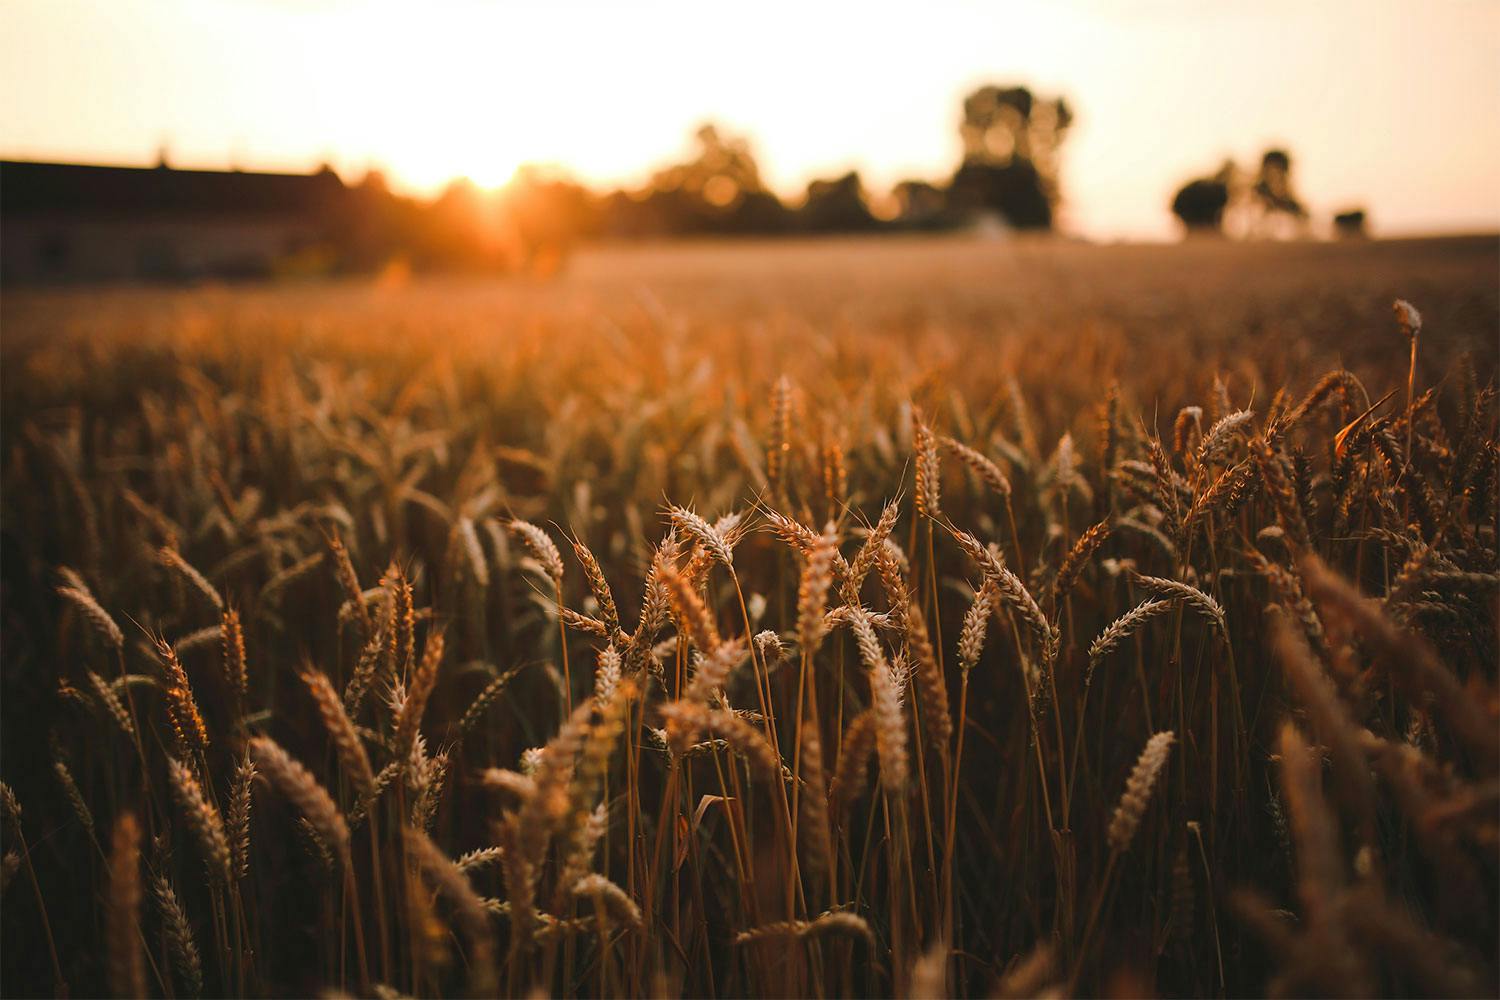 A field of wheat at sunset.